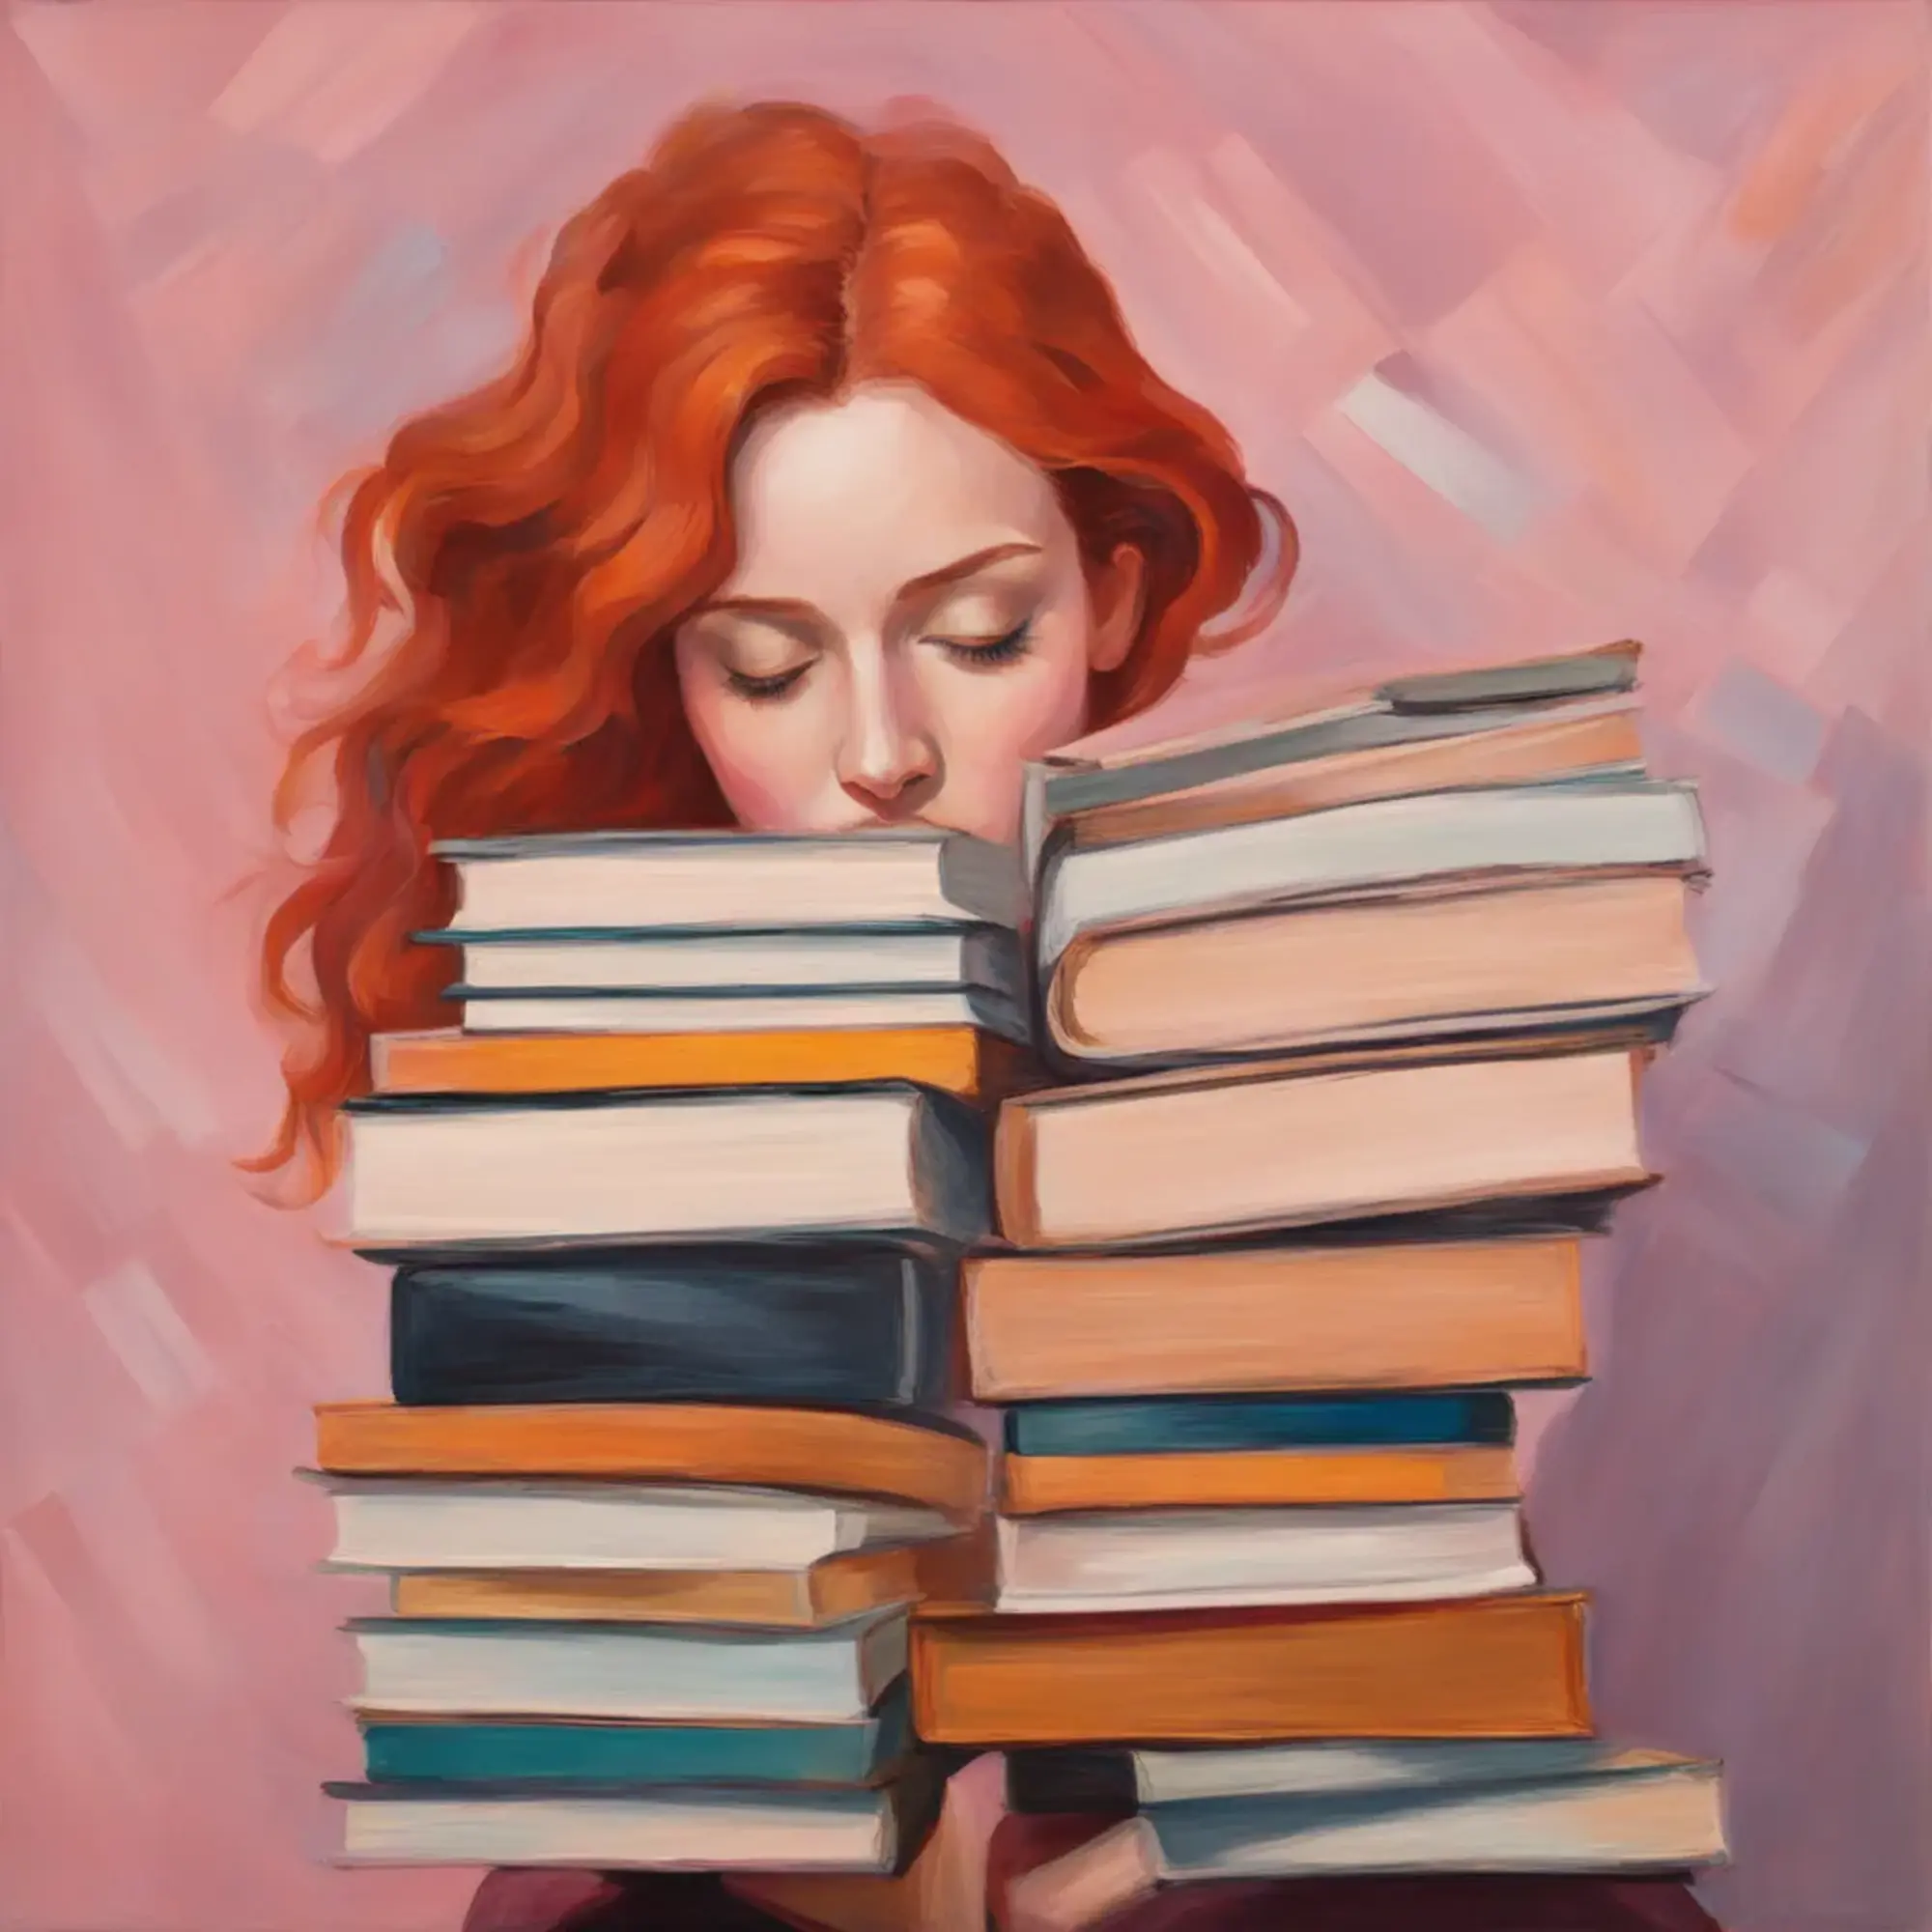 redhaired woman holding a pile of books